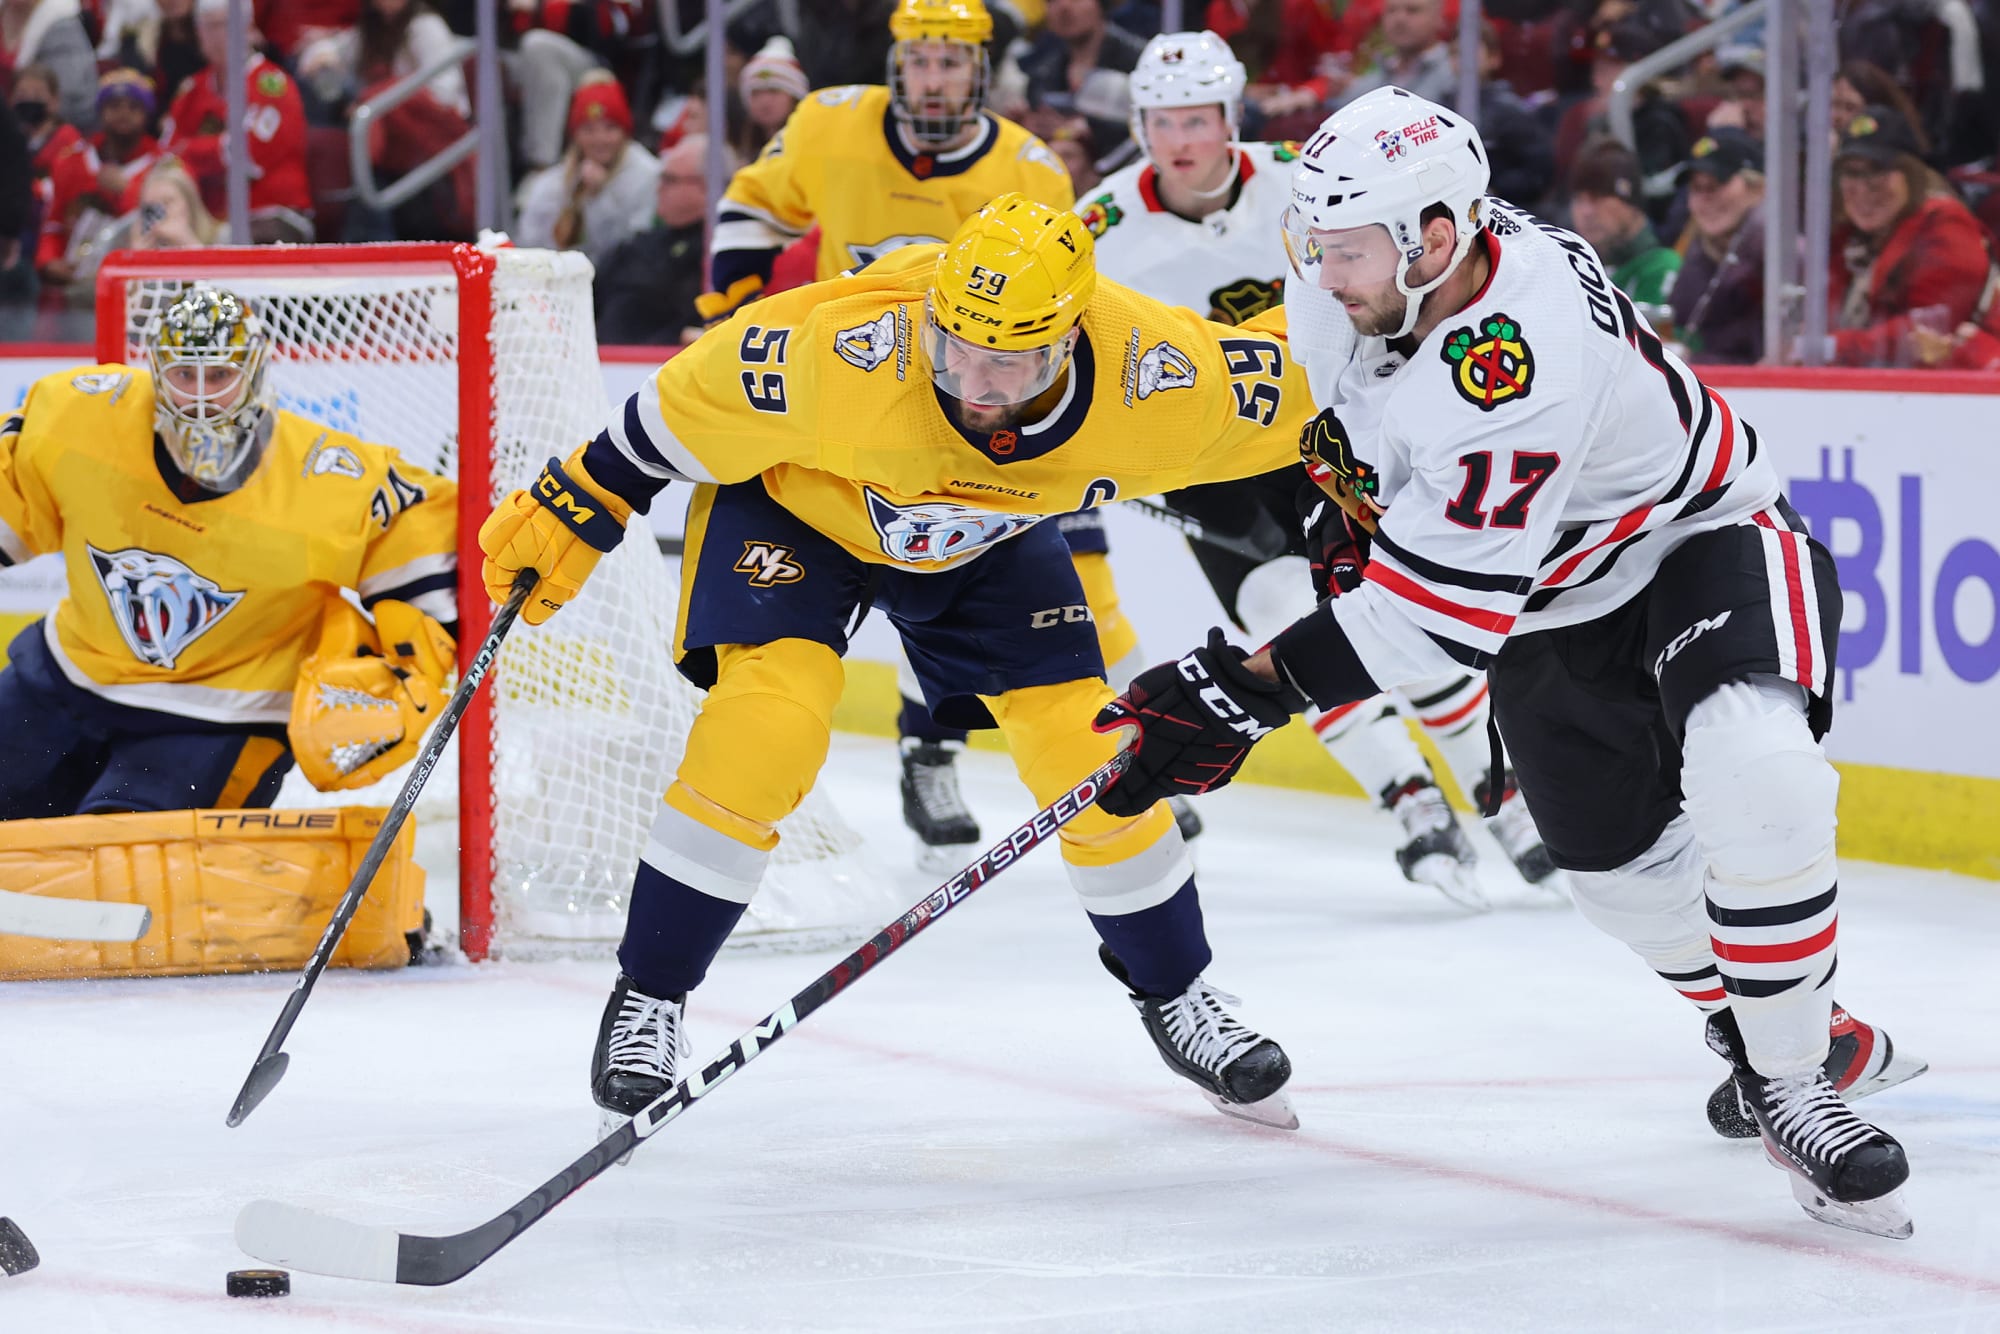 Early projection of Blackhawks' 2023-24 Opening Night roster with Connor  Bedard – NBC Sports Chicago